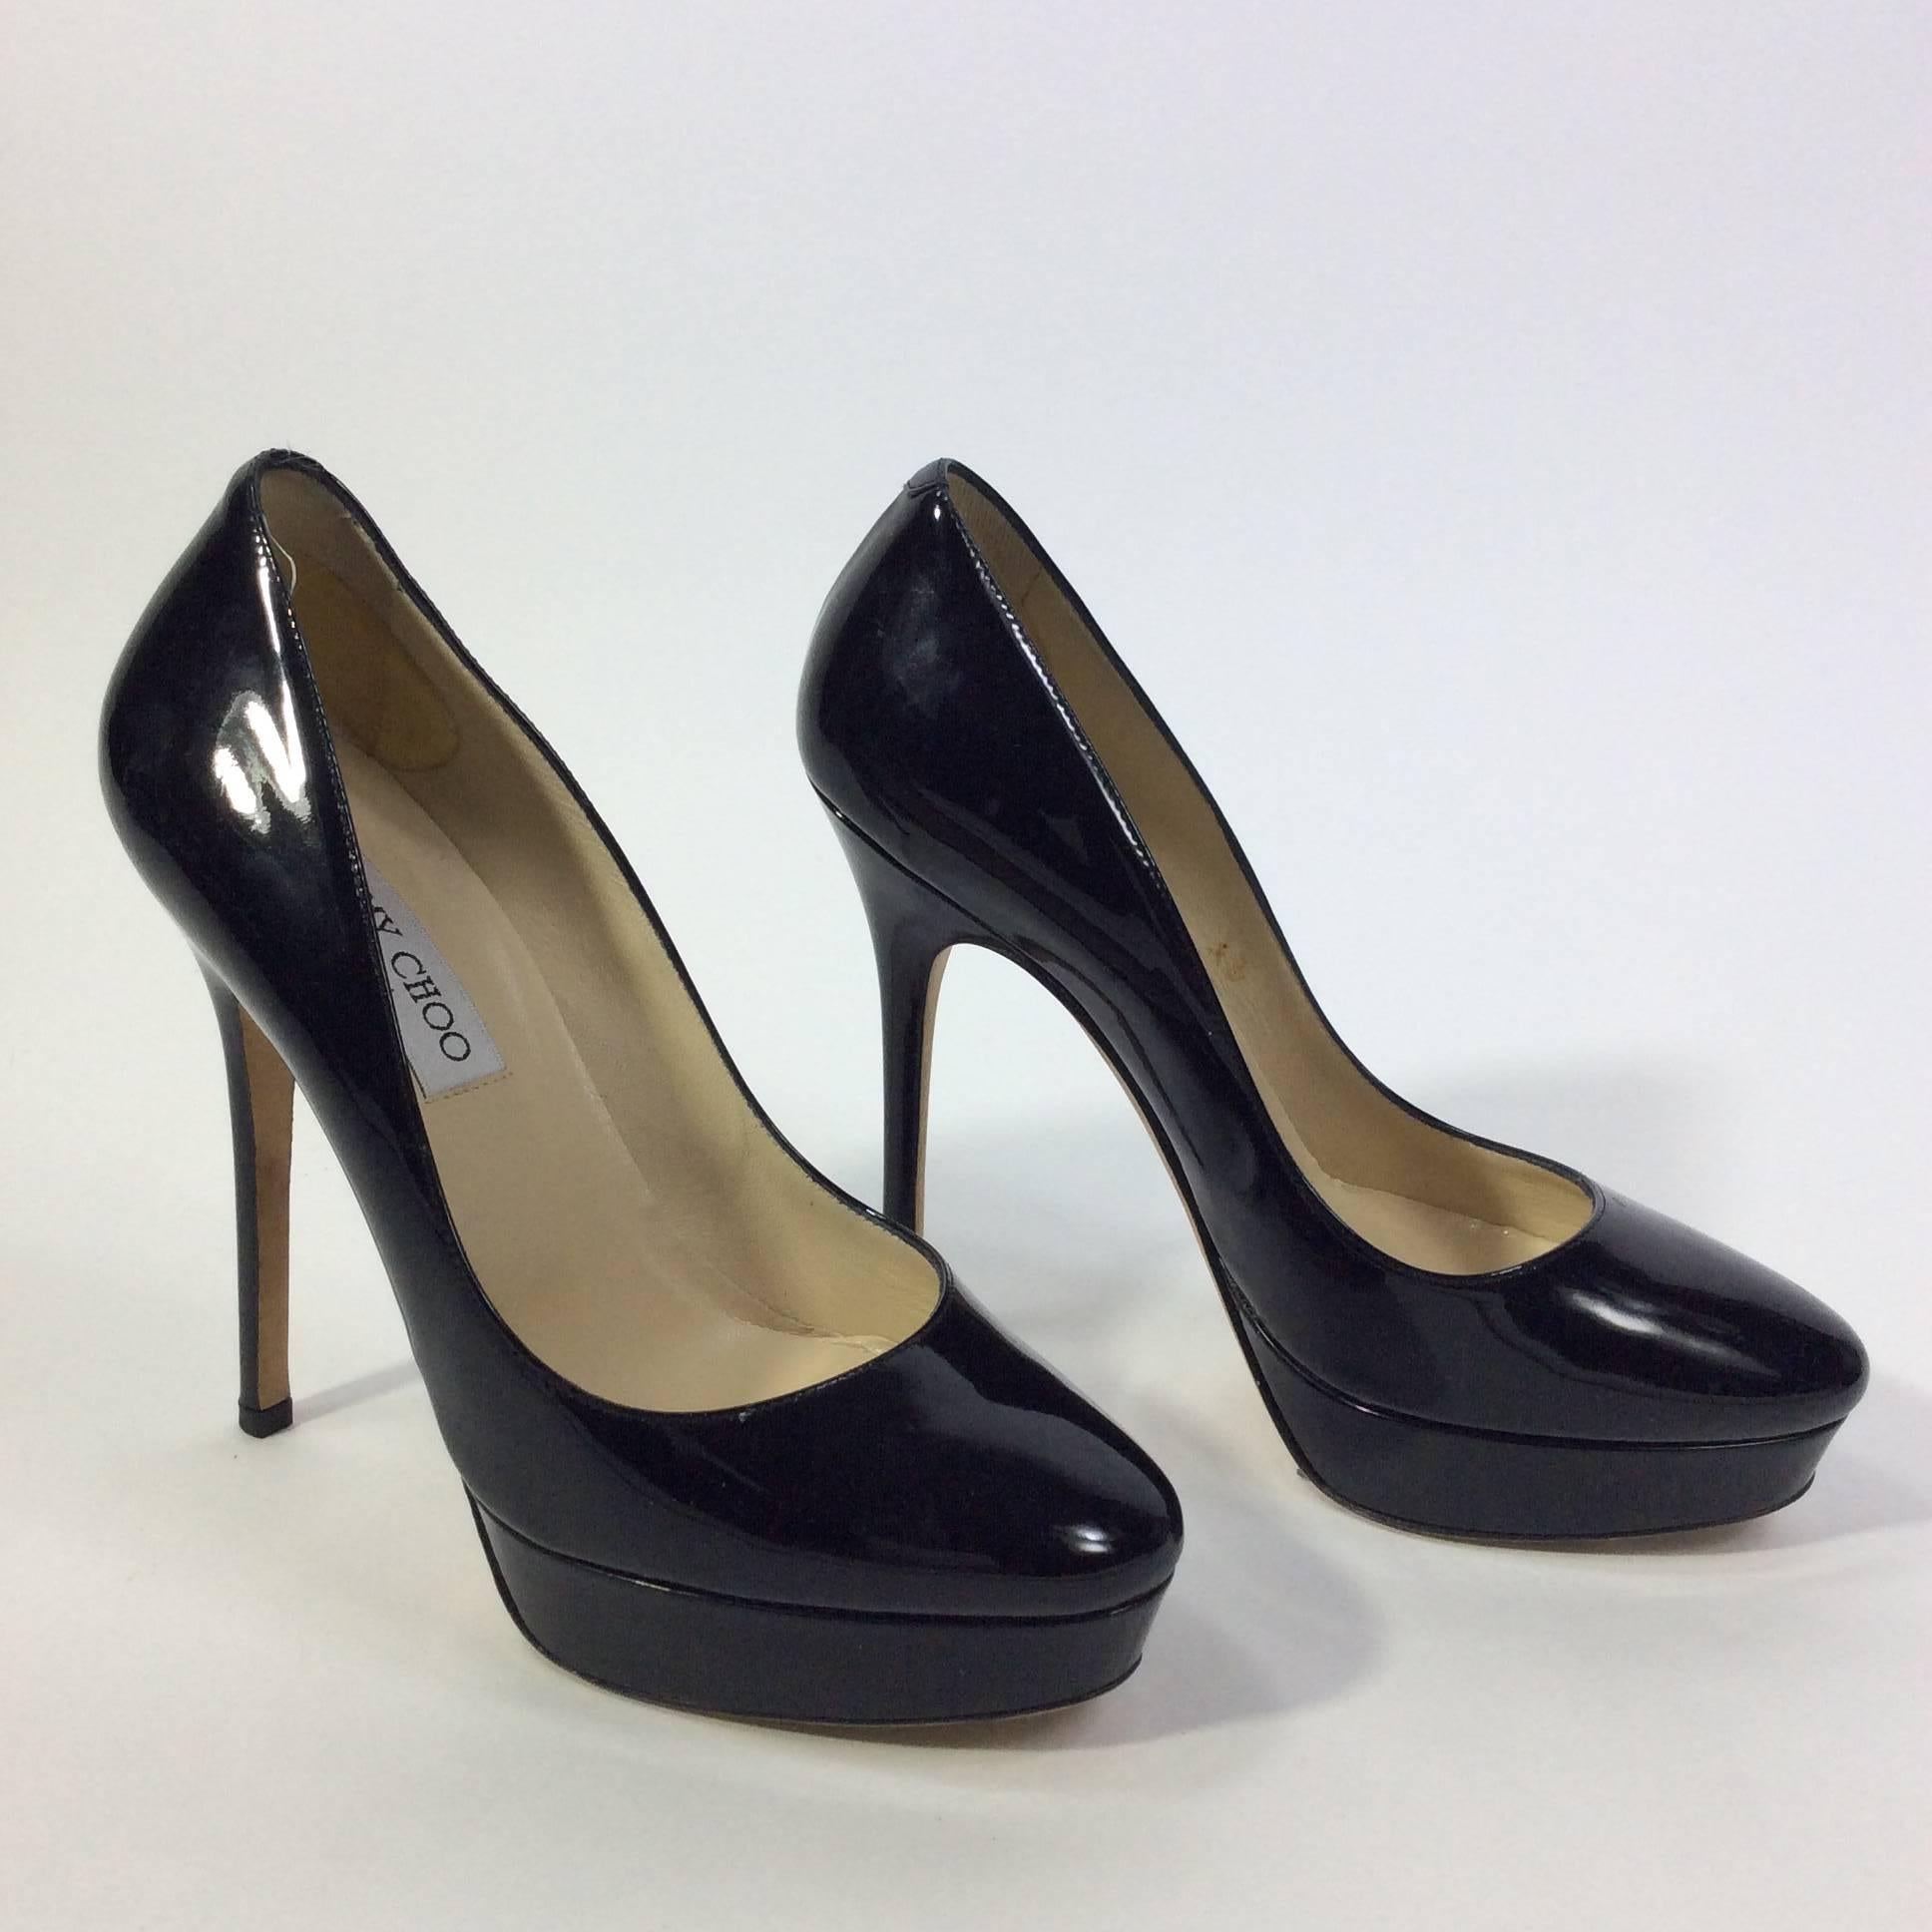 Jimmy Choo Black Patent Pump with Rounded Toe For Sale 2